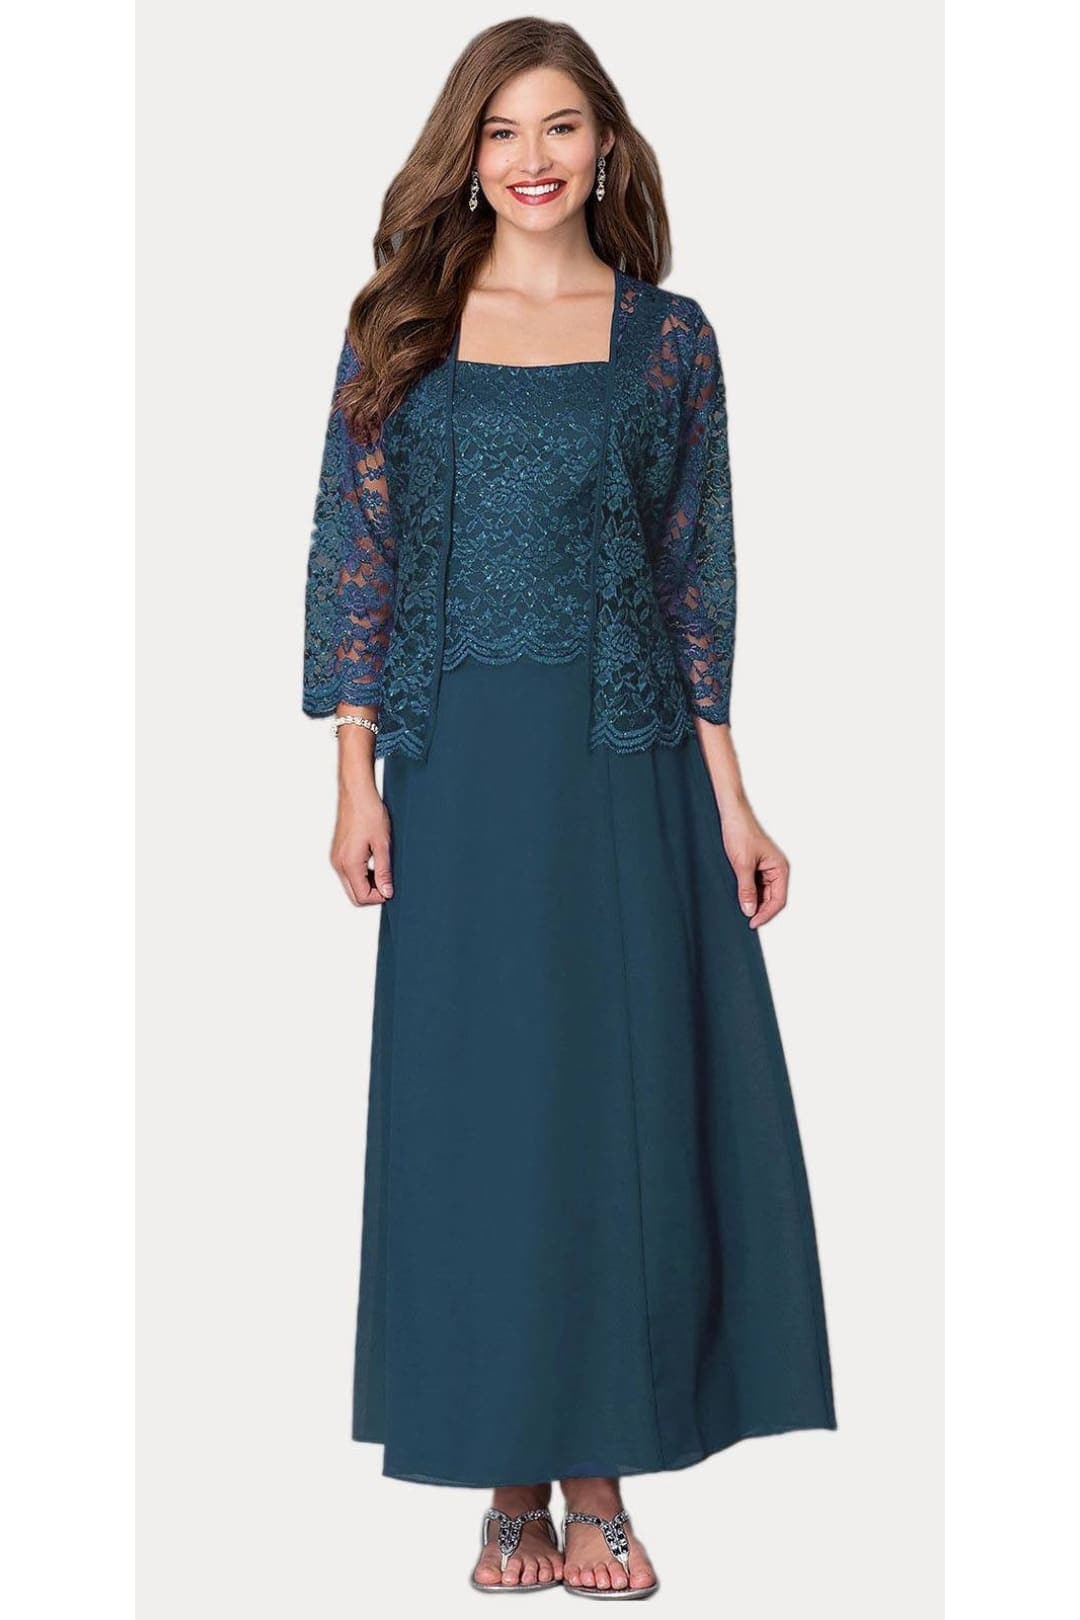 J&J Fashion 8466 Classy Mother Of The Bride Dress - TEAL / M